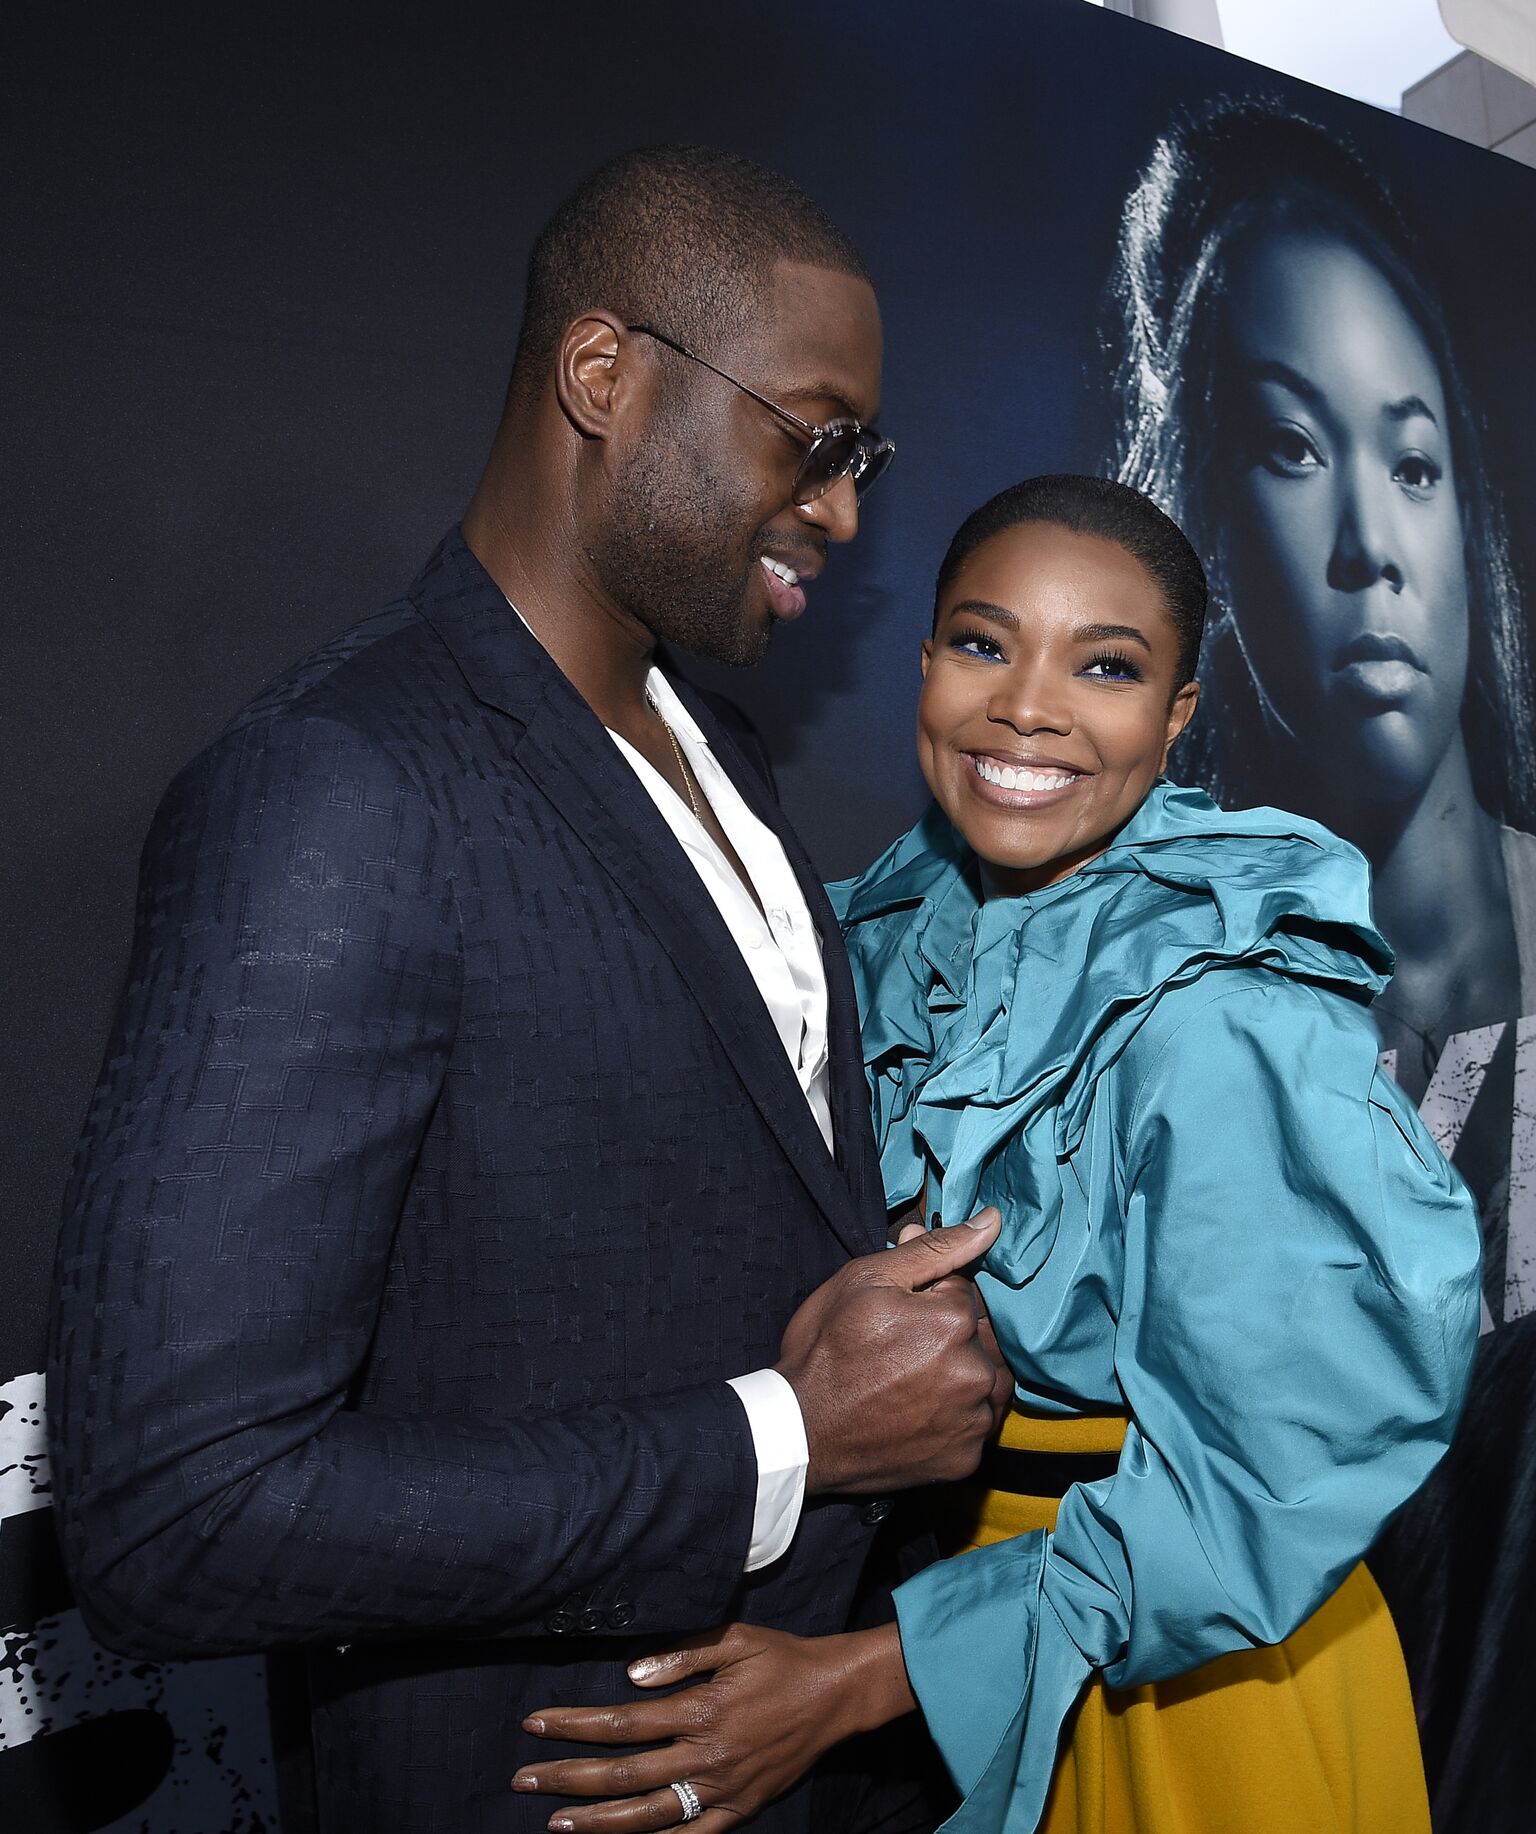 Gabrielle Union and her husband basketball player for the Miami Heat Dwyane Wade arrive for Universal Pictures' special screening of the film "Breaking In" at ArcLight Cinemas | Getty Images